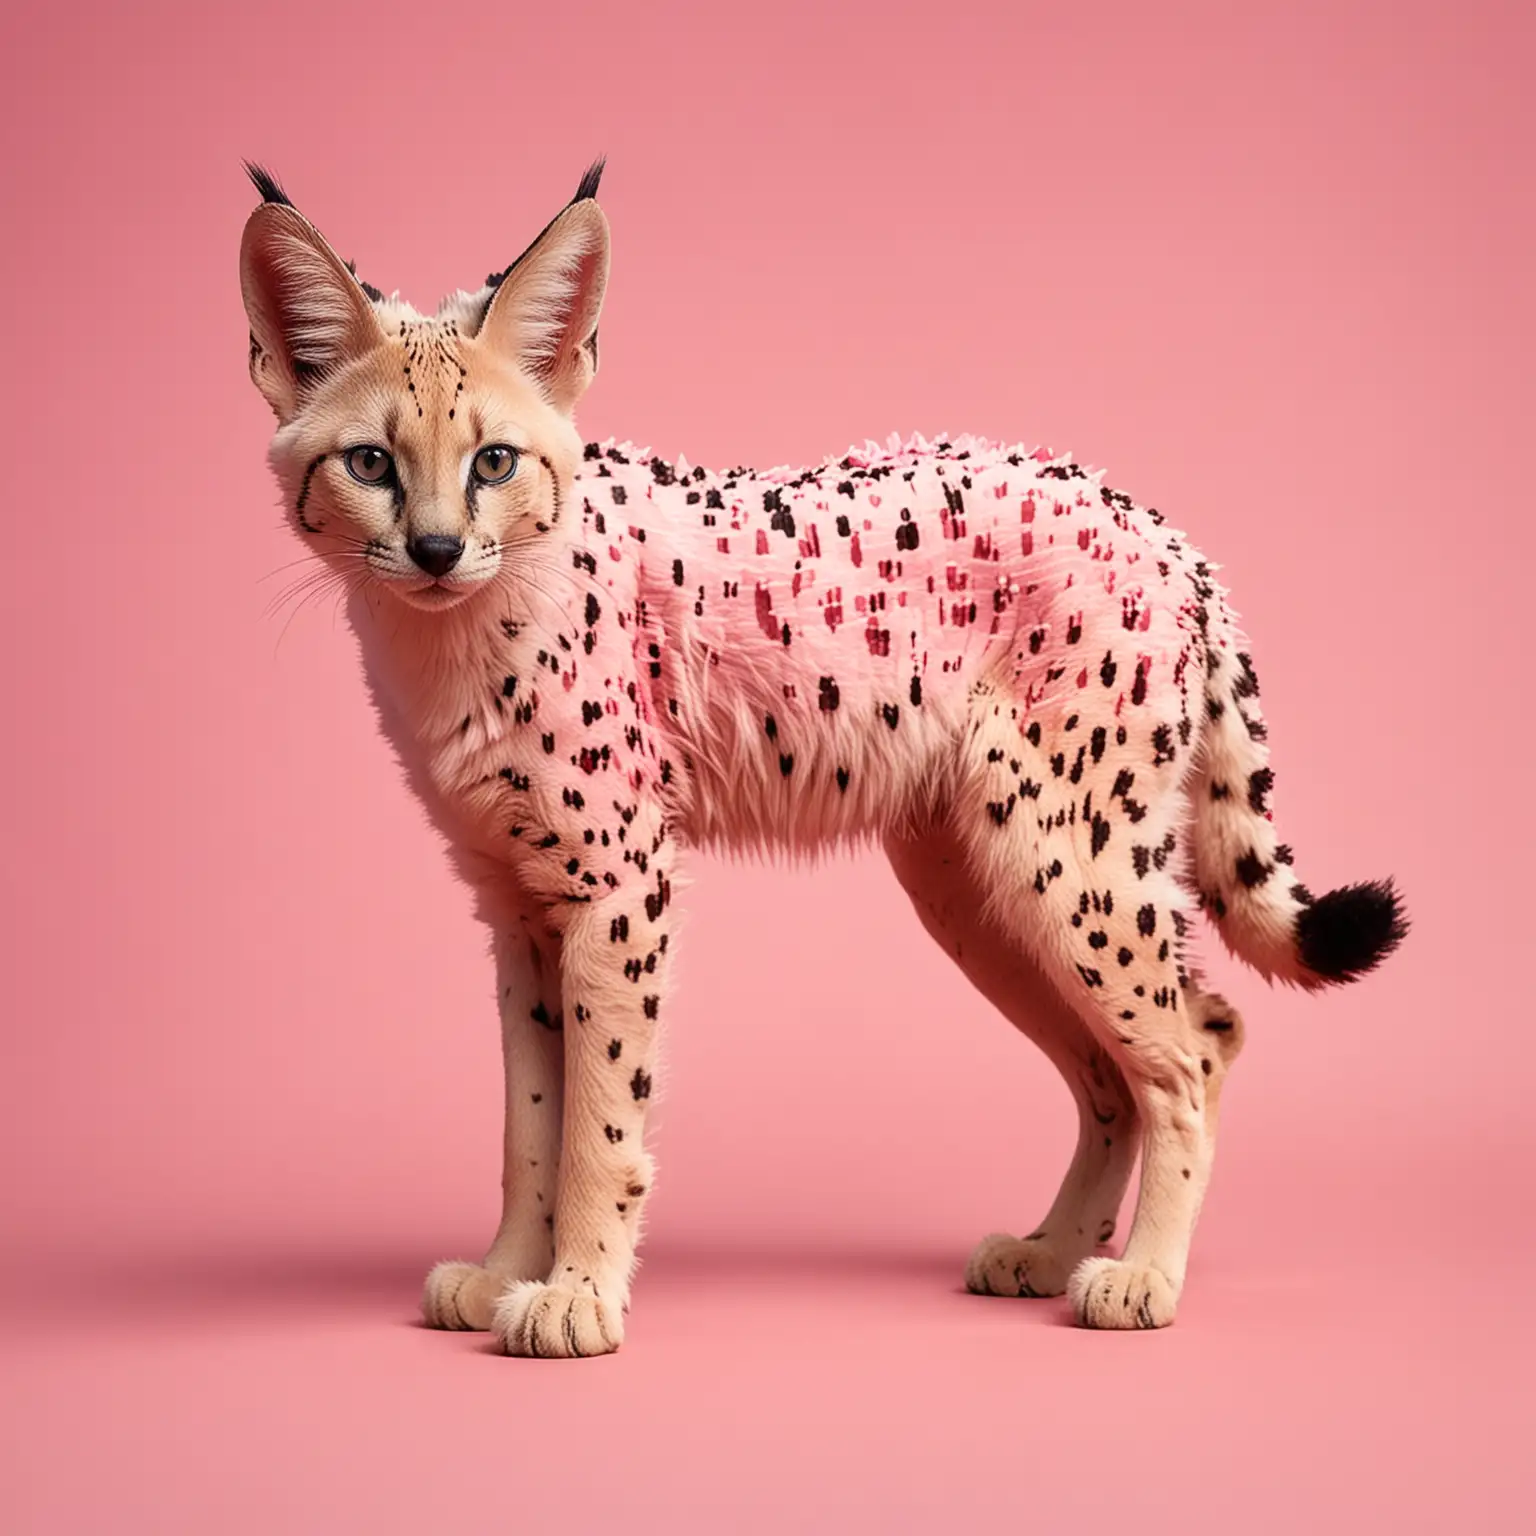 Pixelated Pink Serval on Pink Background